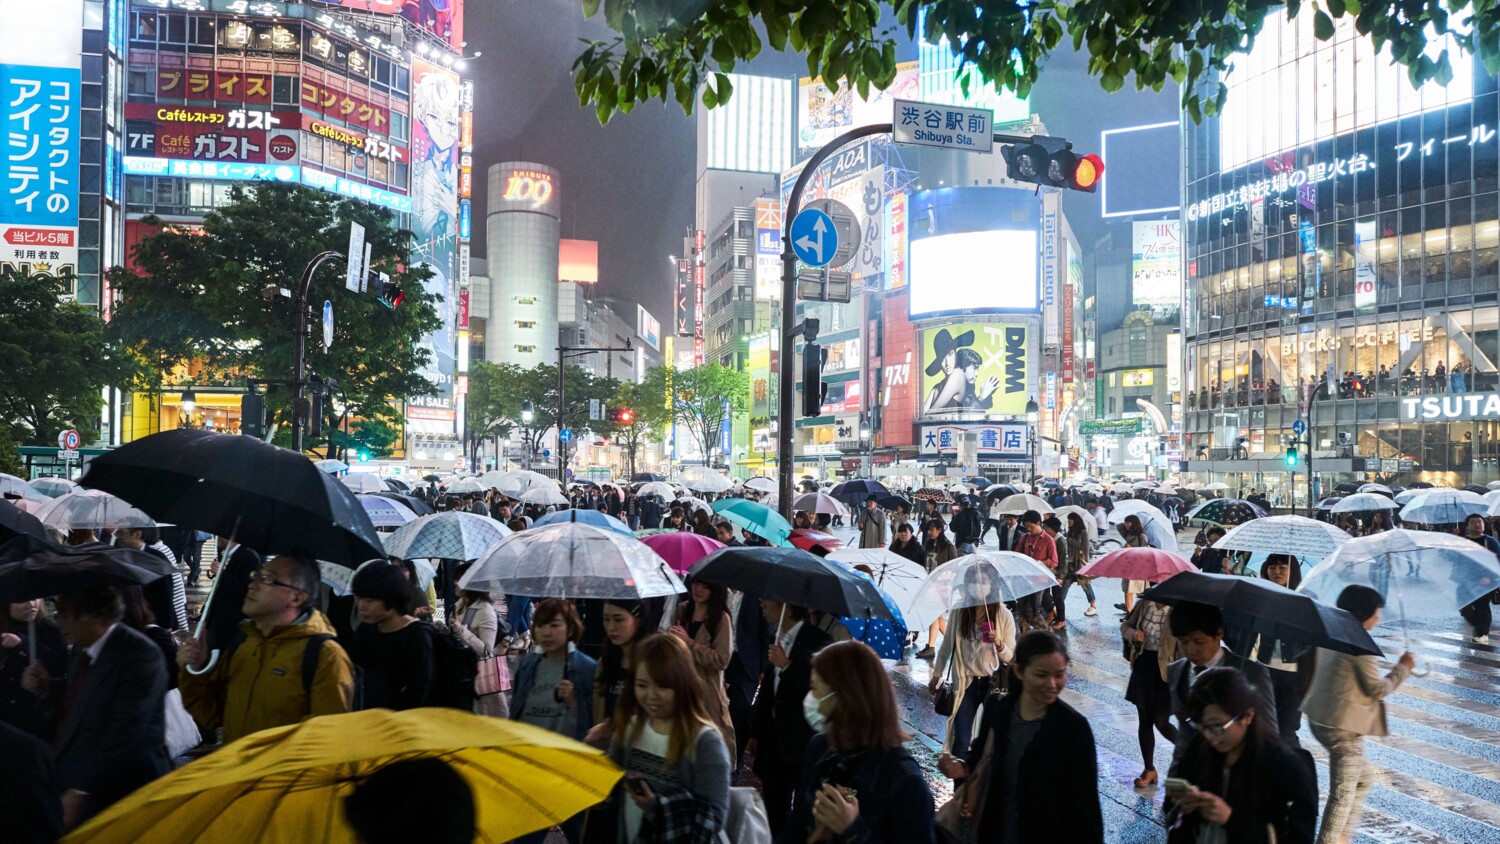 Crowd with umbrellas on a busy street in Tokyo